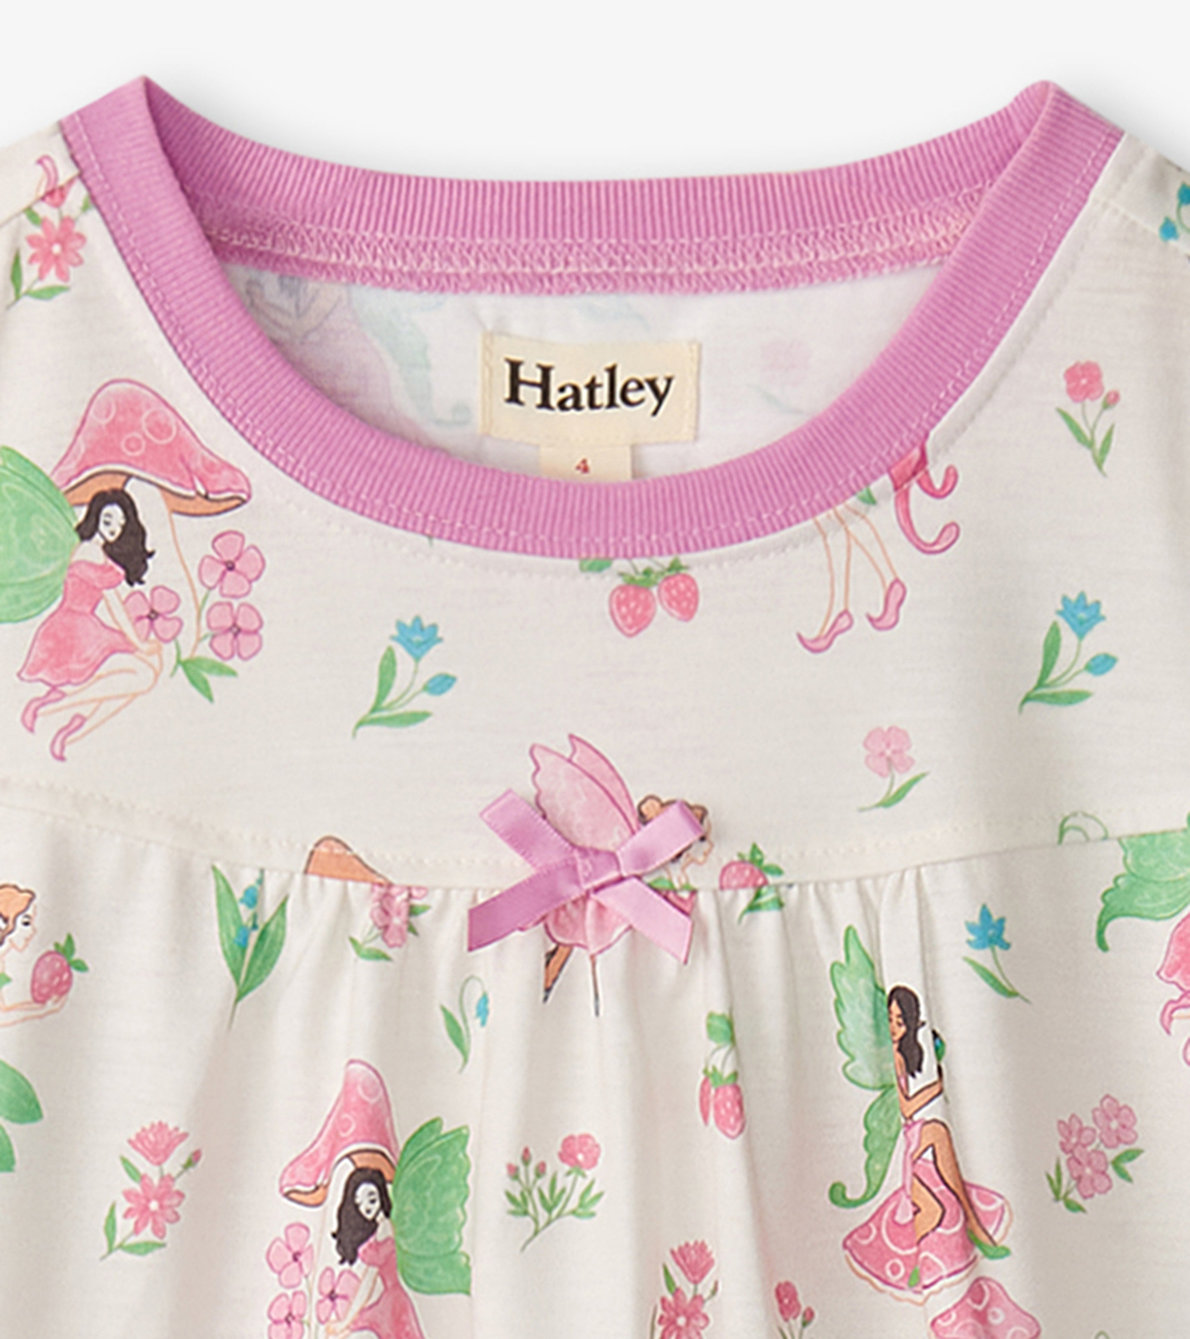 View larger image of Girls Forest Fairies Short Sleeve Nightgown